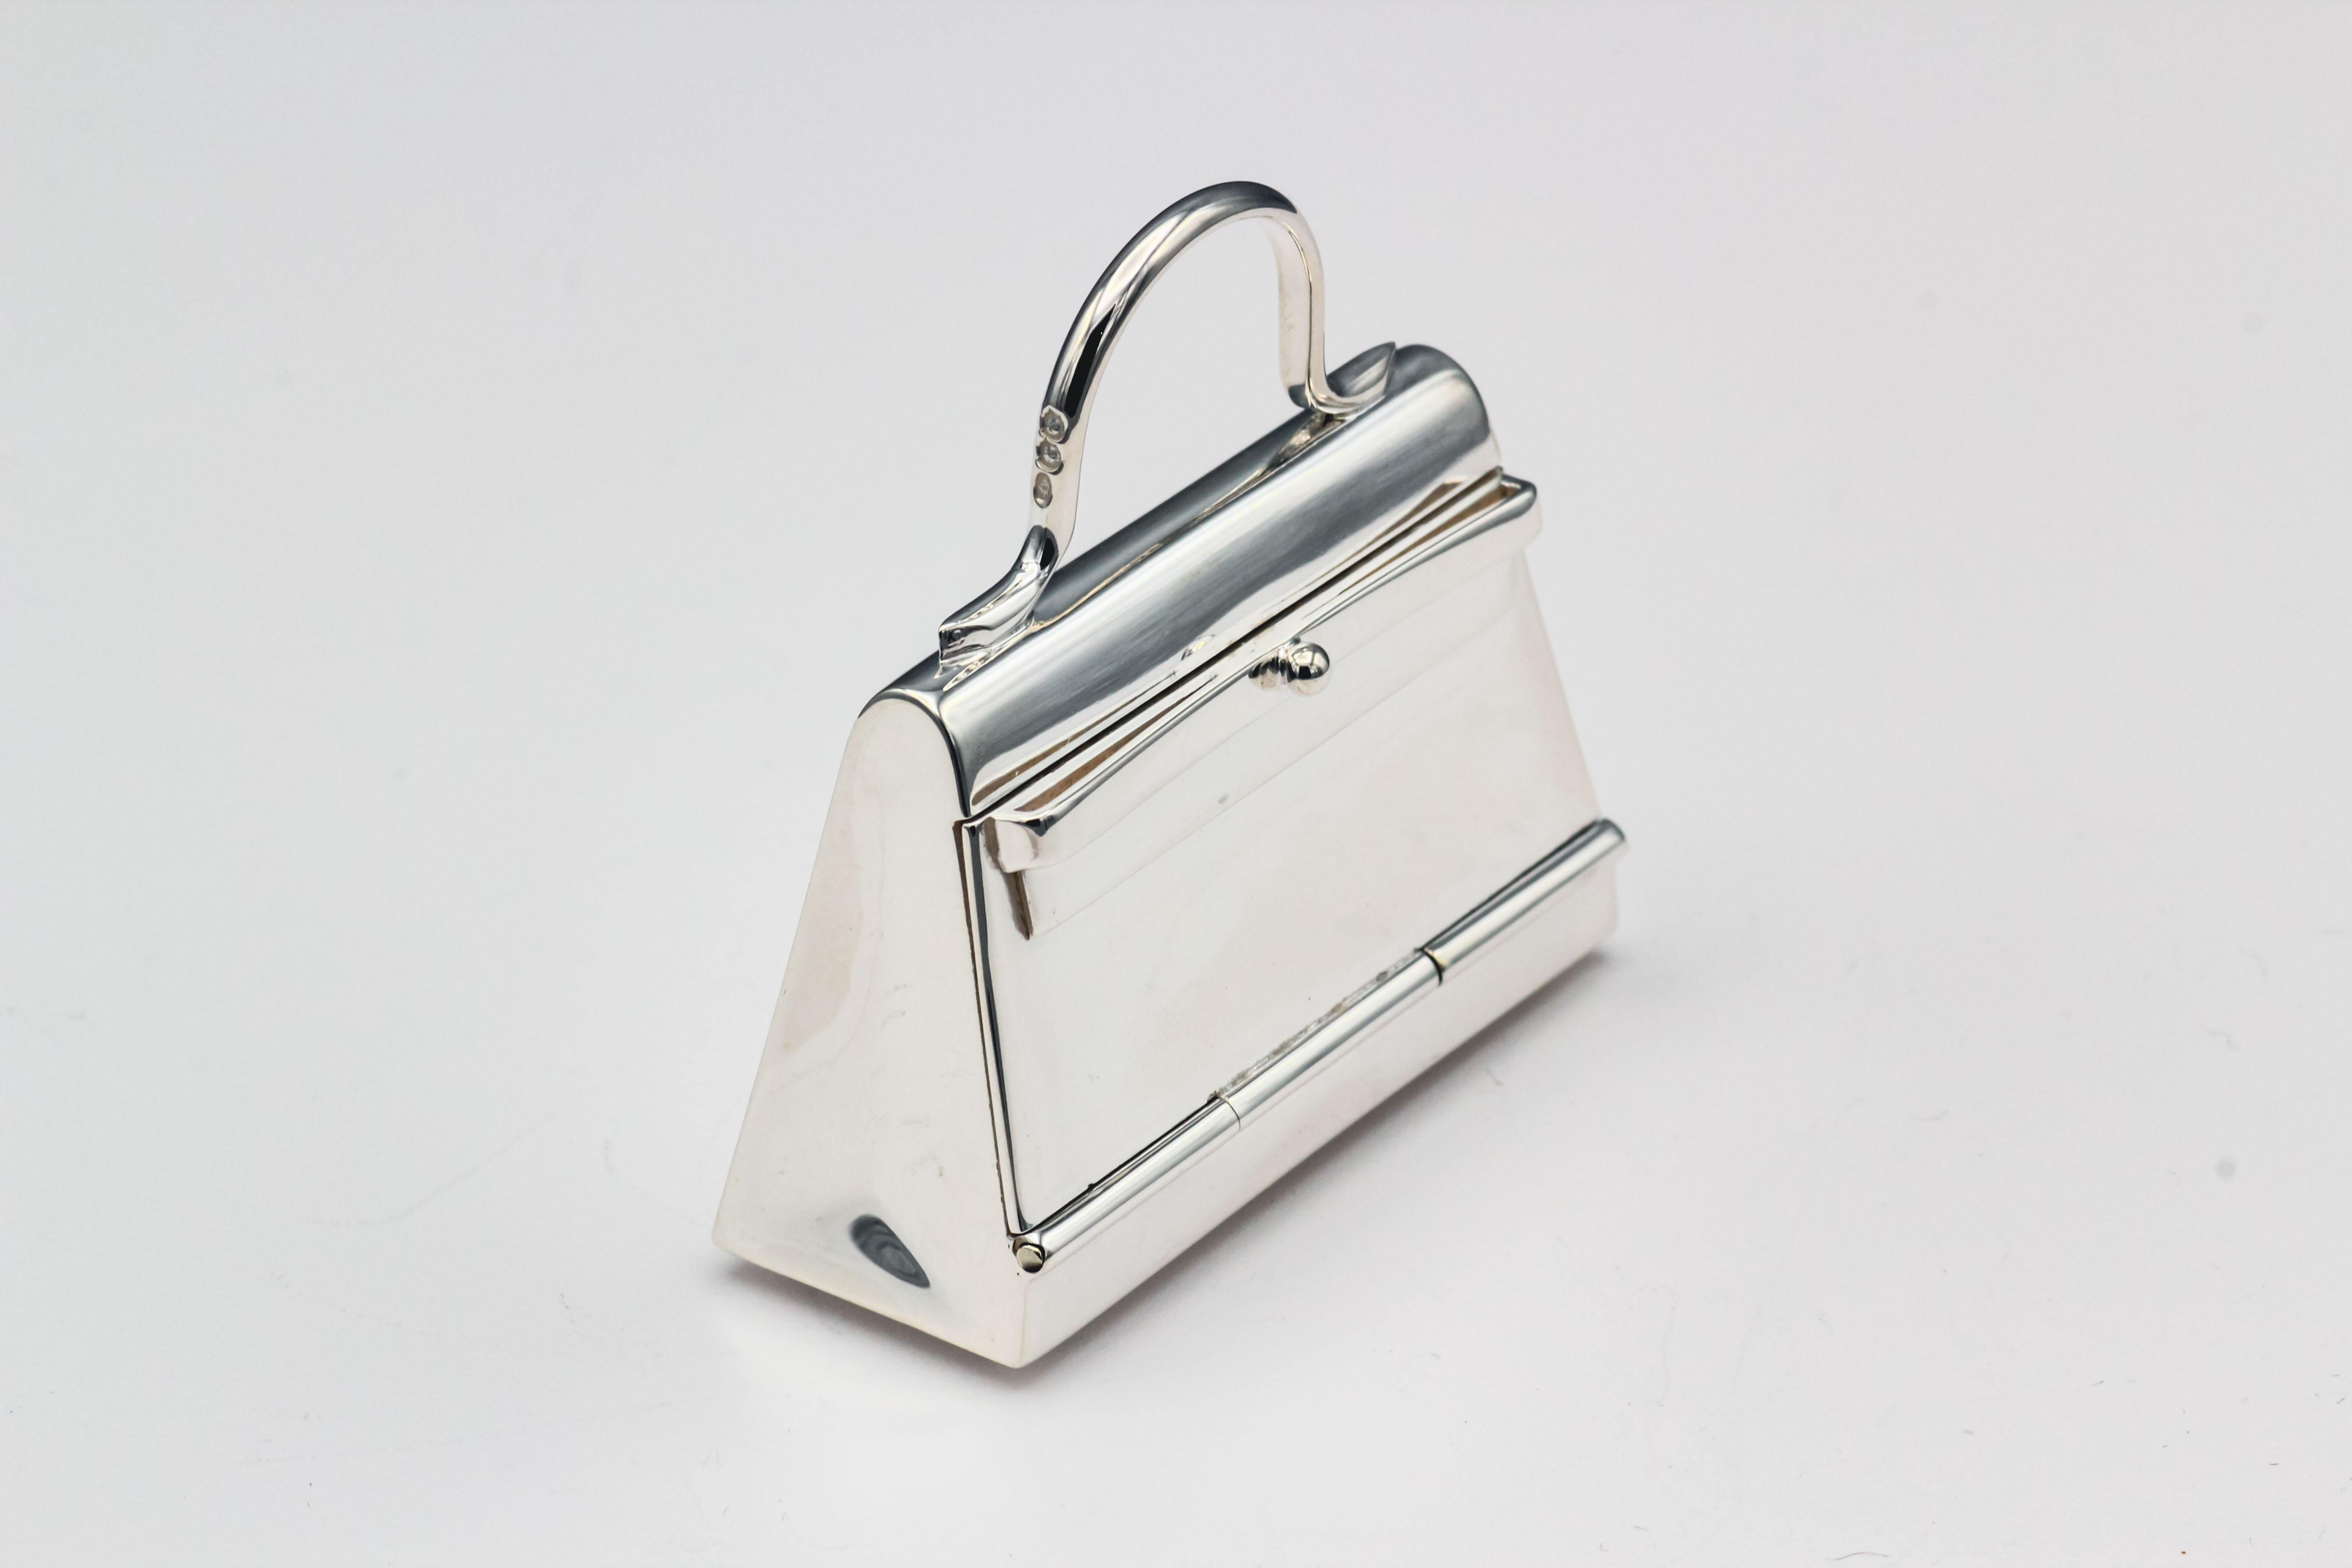 Fine sterling silver pill box in the likeness of an Hermes Kelly bag, by Hermes circa 1980s.  The box can be used in a multitude of ways: as a standard pillbox, a pendant, or as a charm.  Approx. 1.75 inches wide and approx. 39 grams in weight. Like